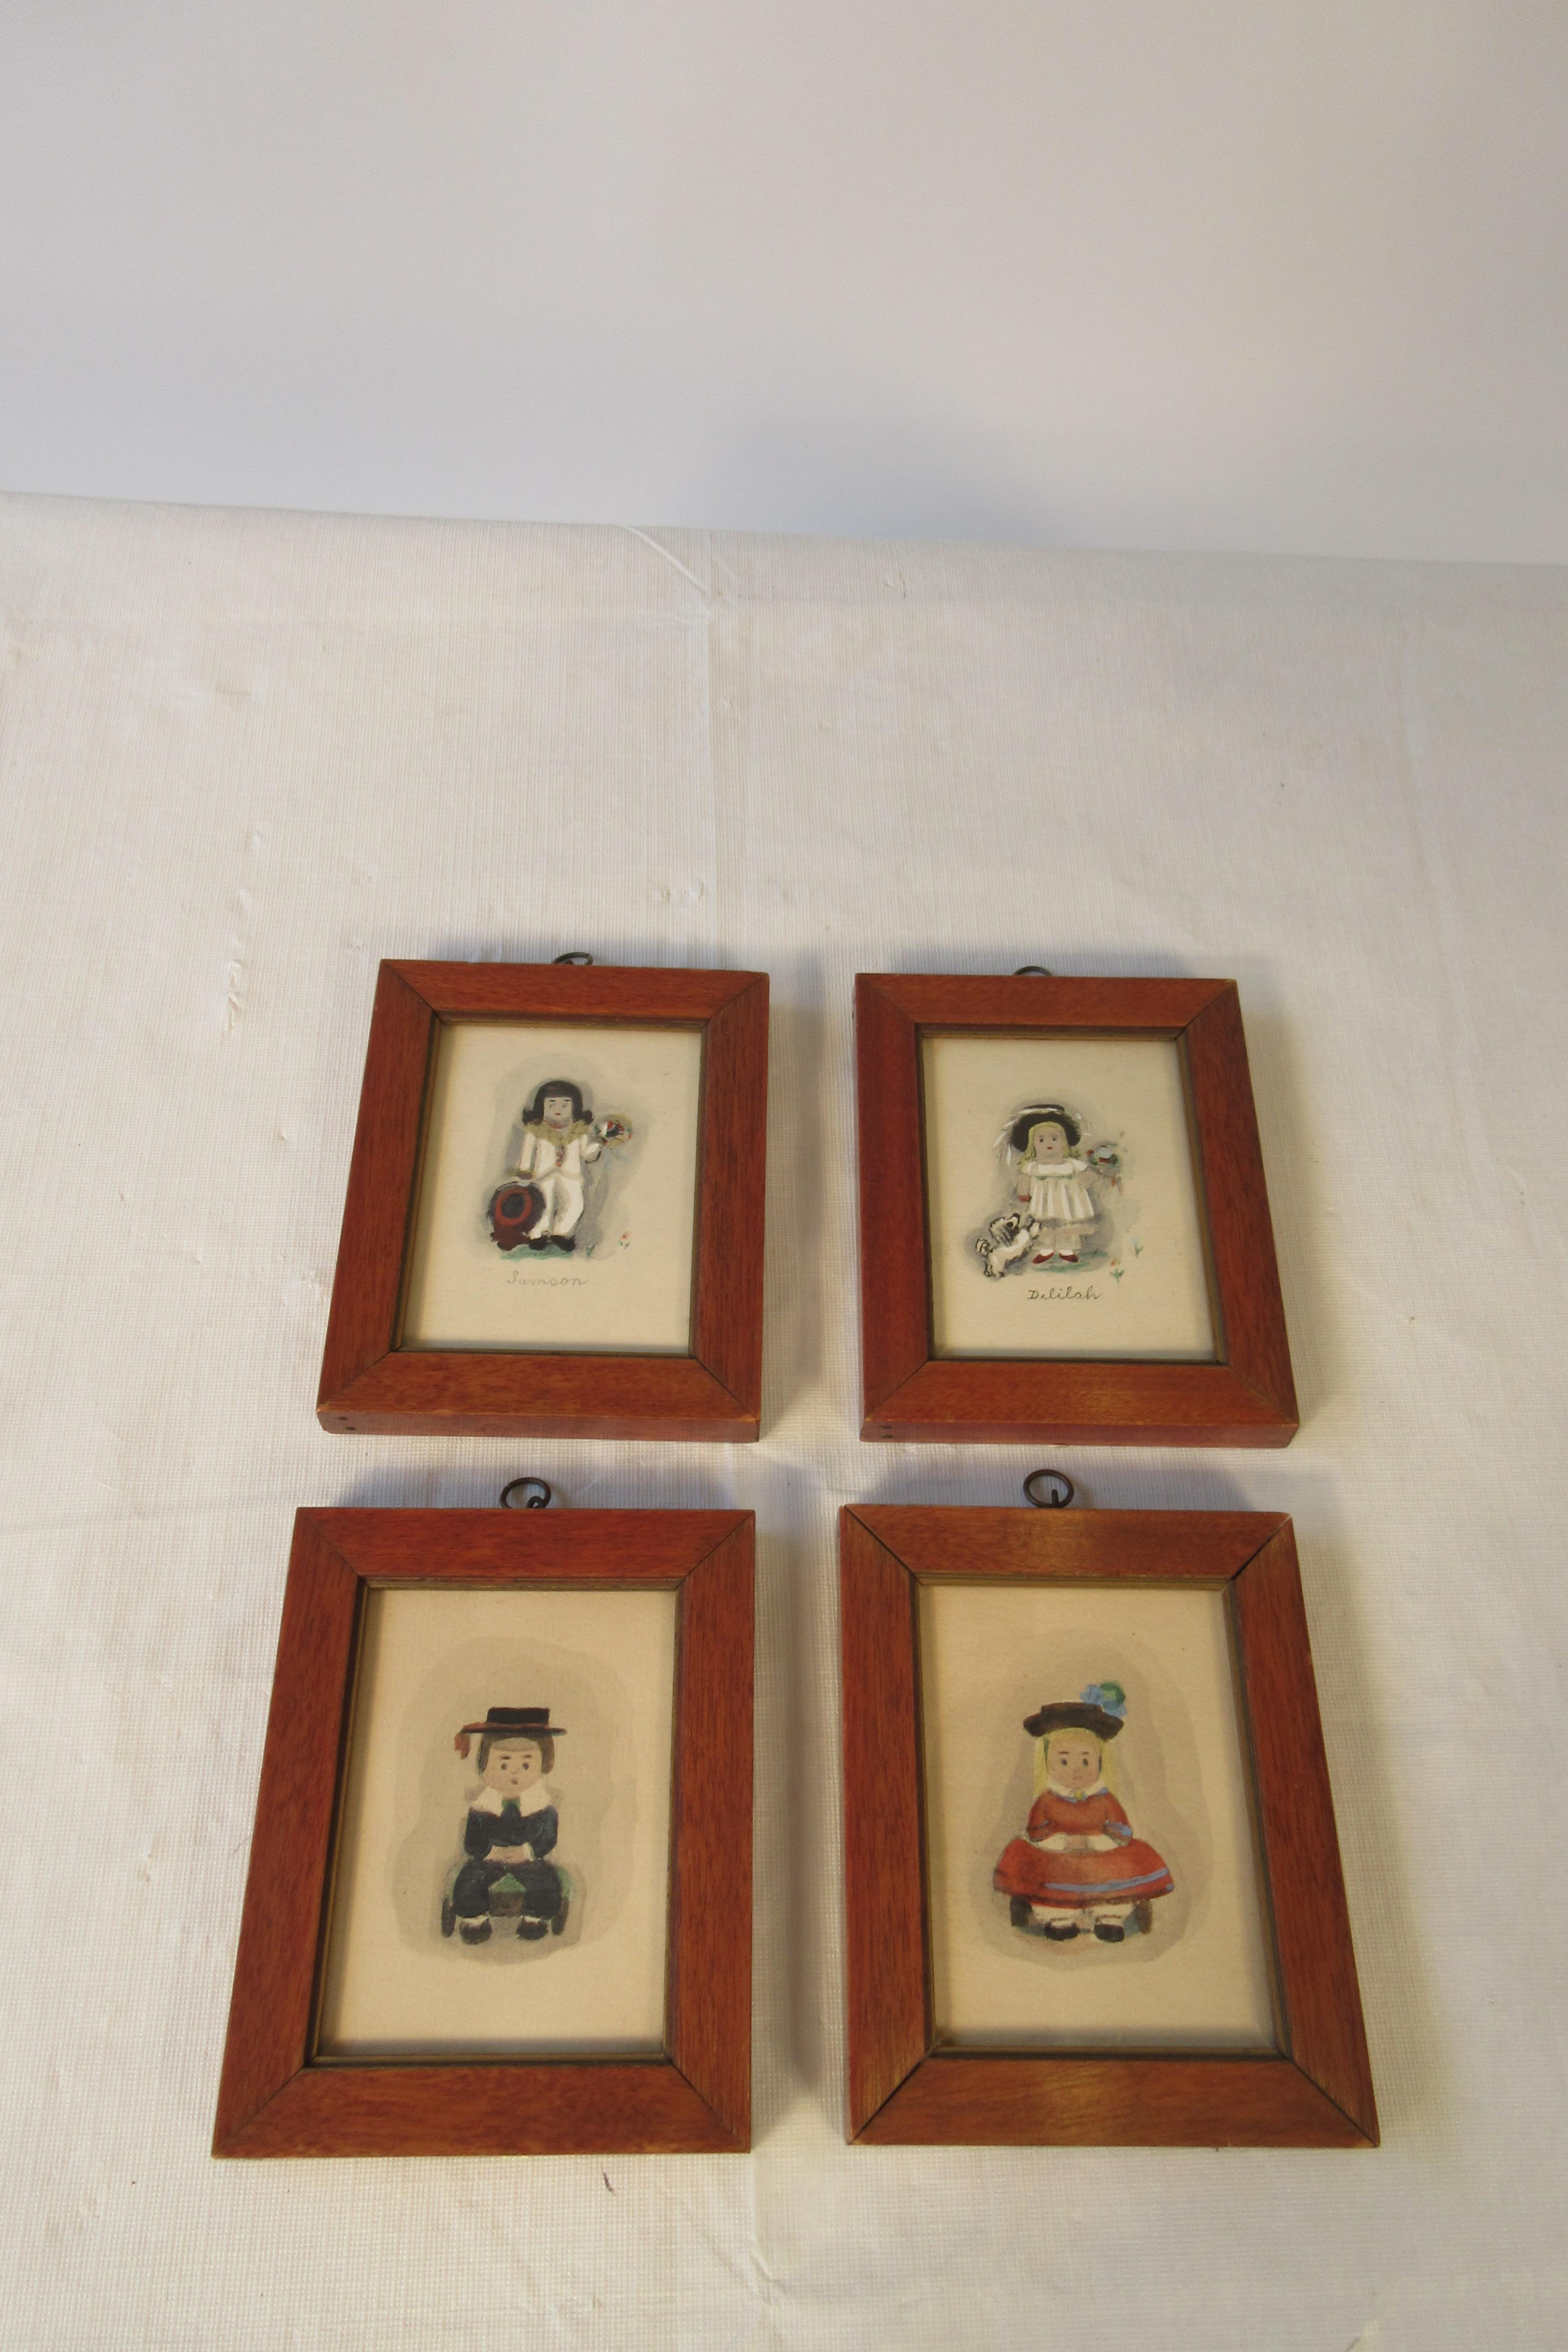 4 small water colors of 19th century children from a Madison Ave. gallery in NYC. Each child has his name written under the image. From a Southampton, NY estate.